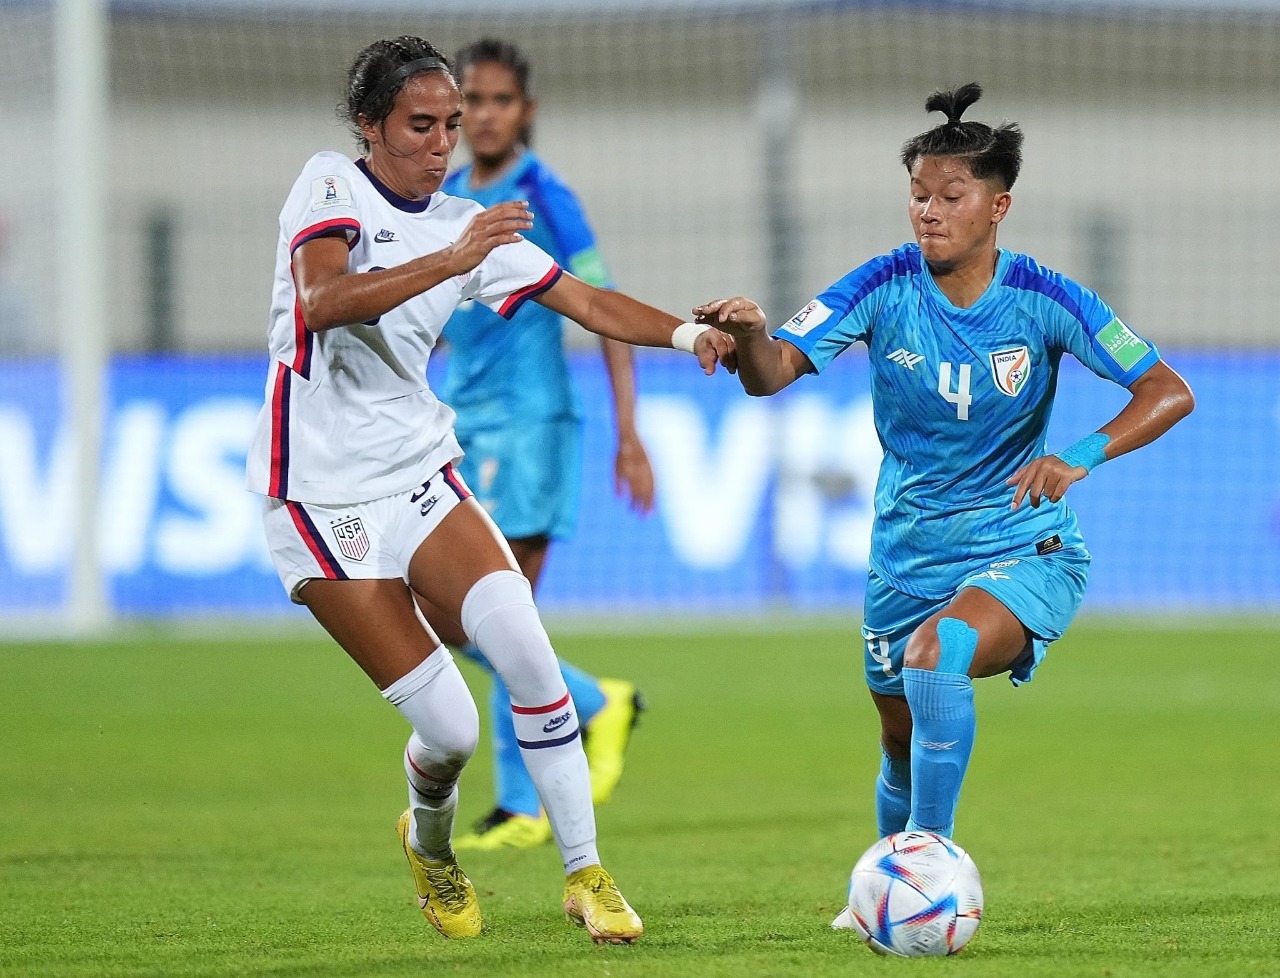 FIFA U-17 Women's WC HIGHLIGHTS: India 0-8 USA, 8-fold USA ROUT India in disappointing FIFA World CUP OPENER : Check INDIA vs USA HIGHLIGHTS